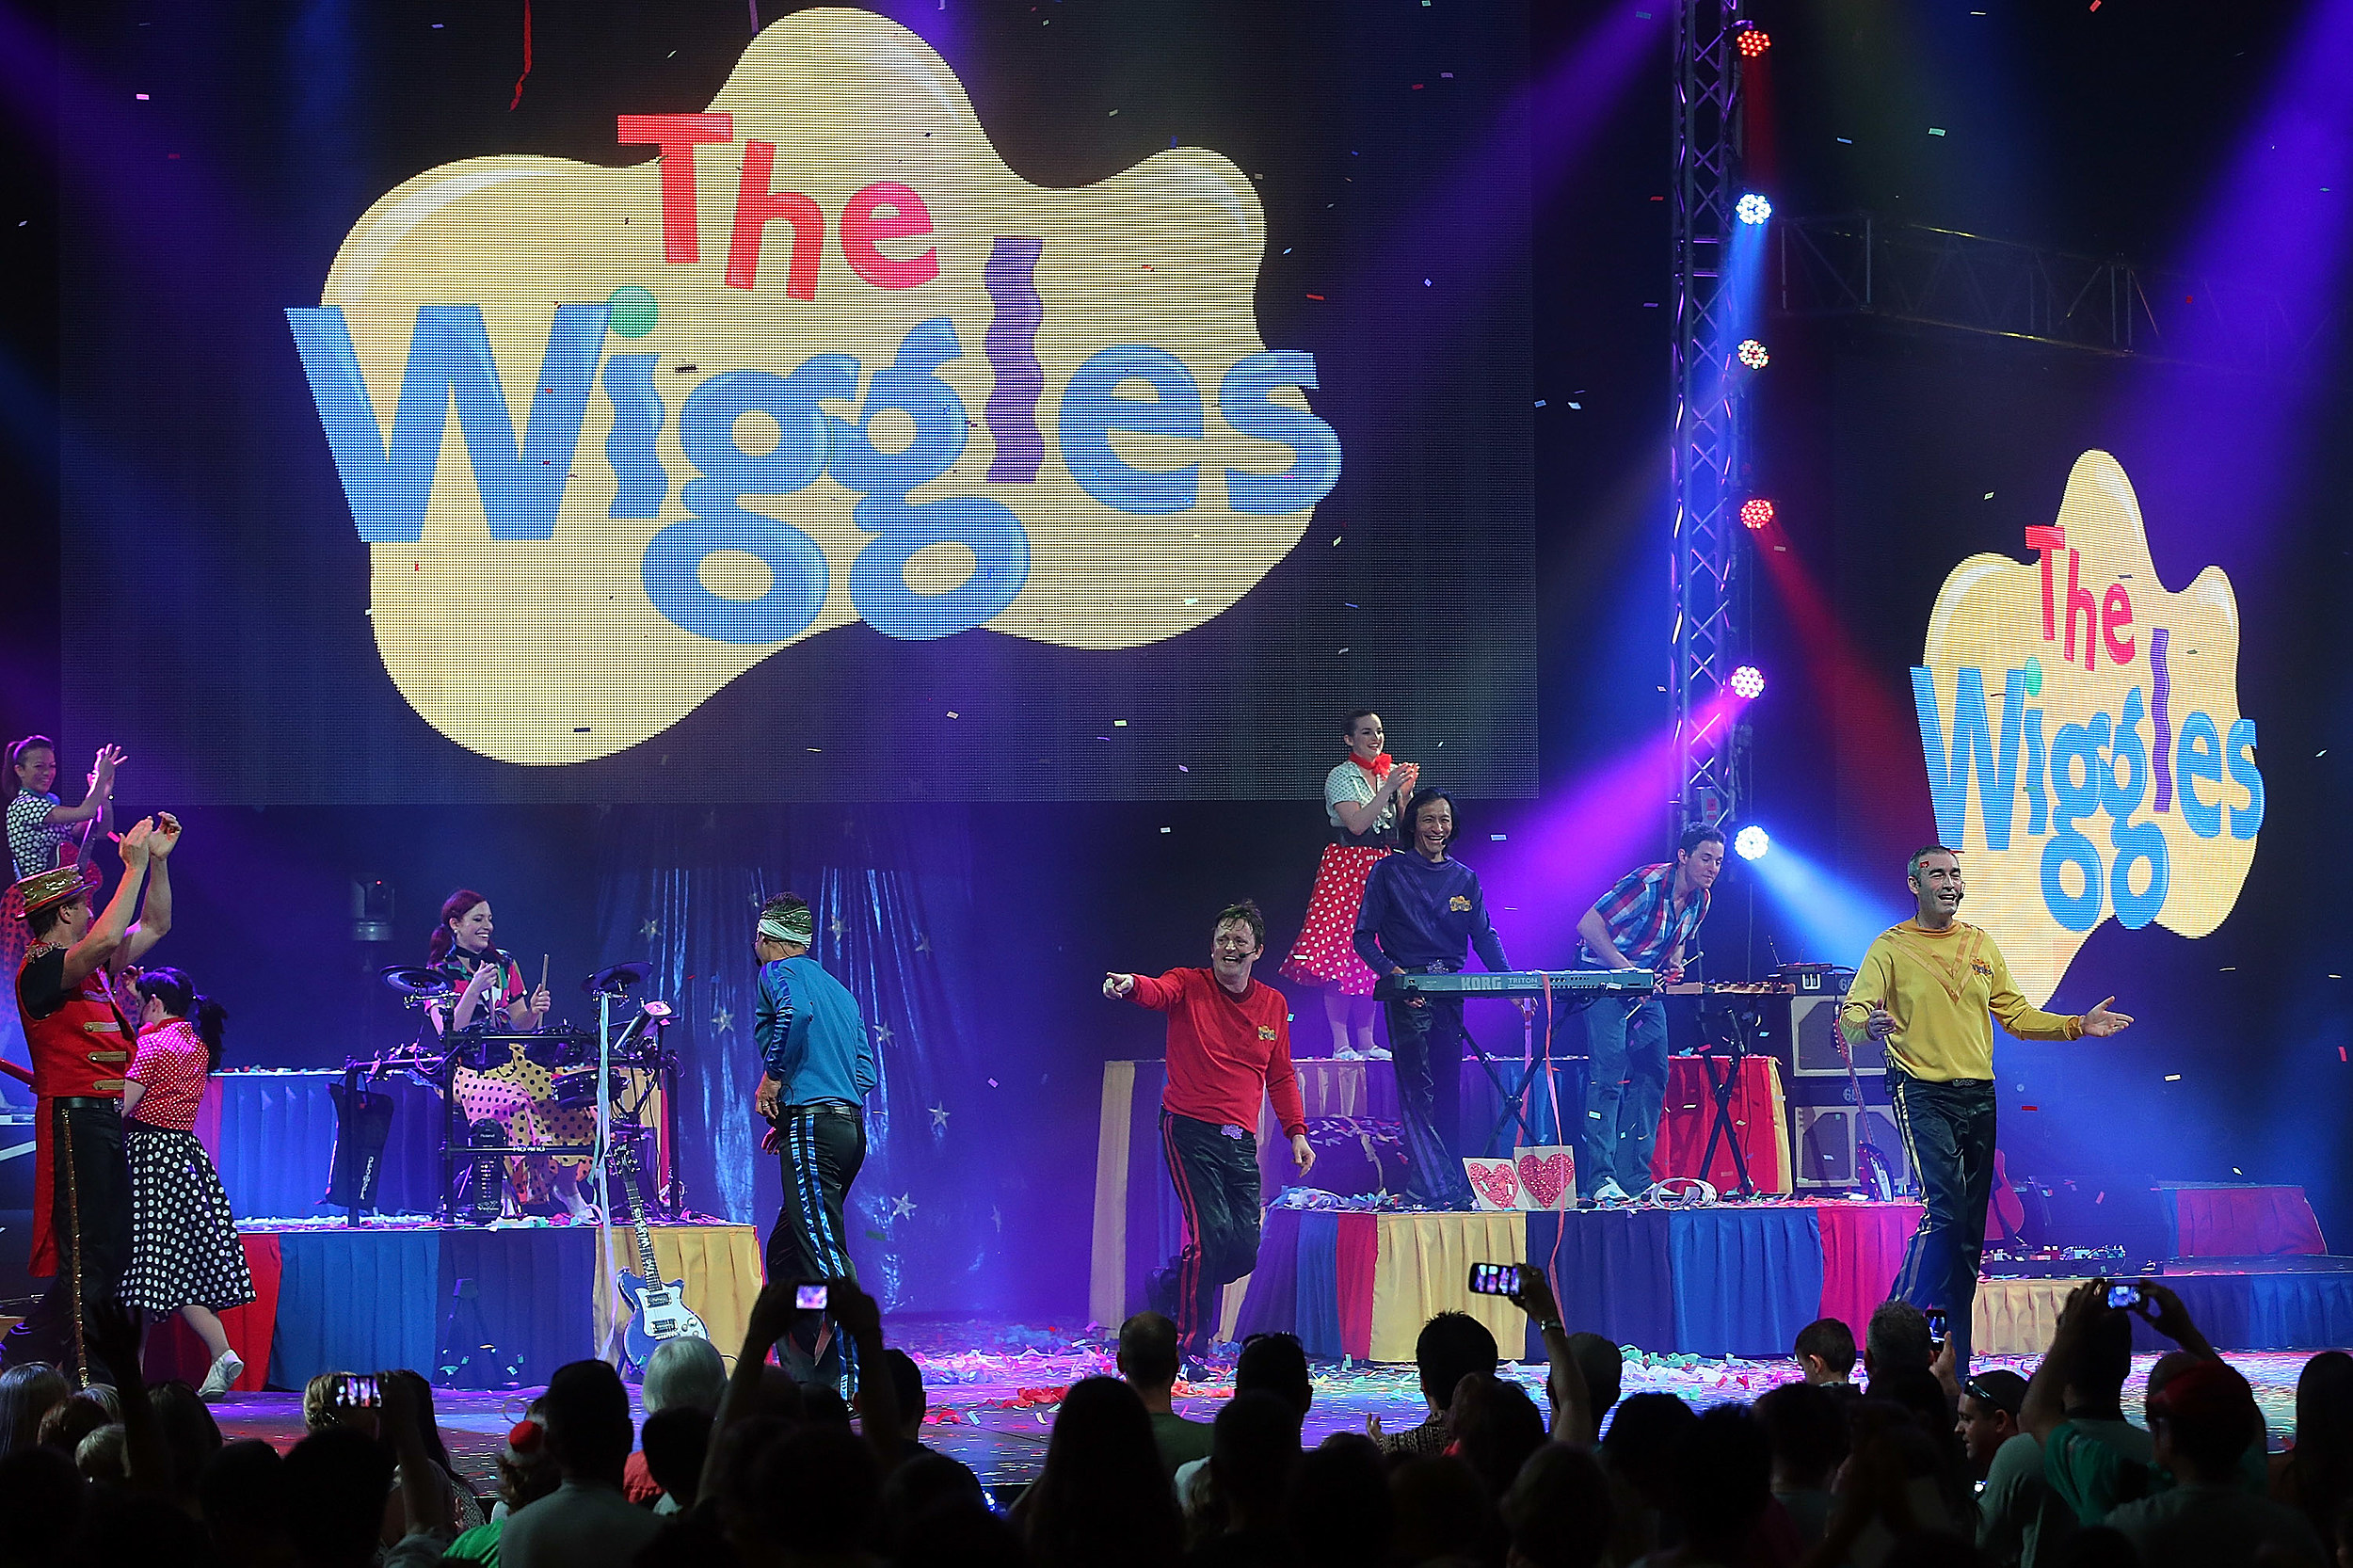 The Wiggles' tour schedule is set for the United States